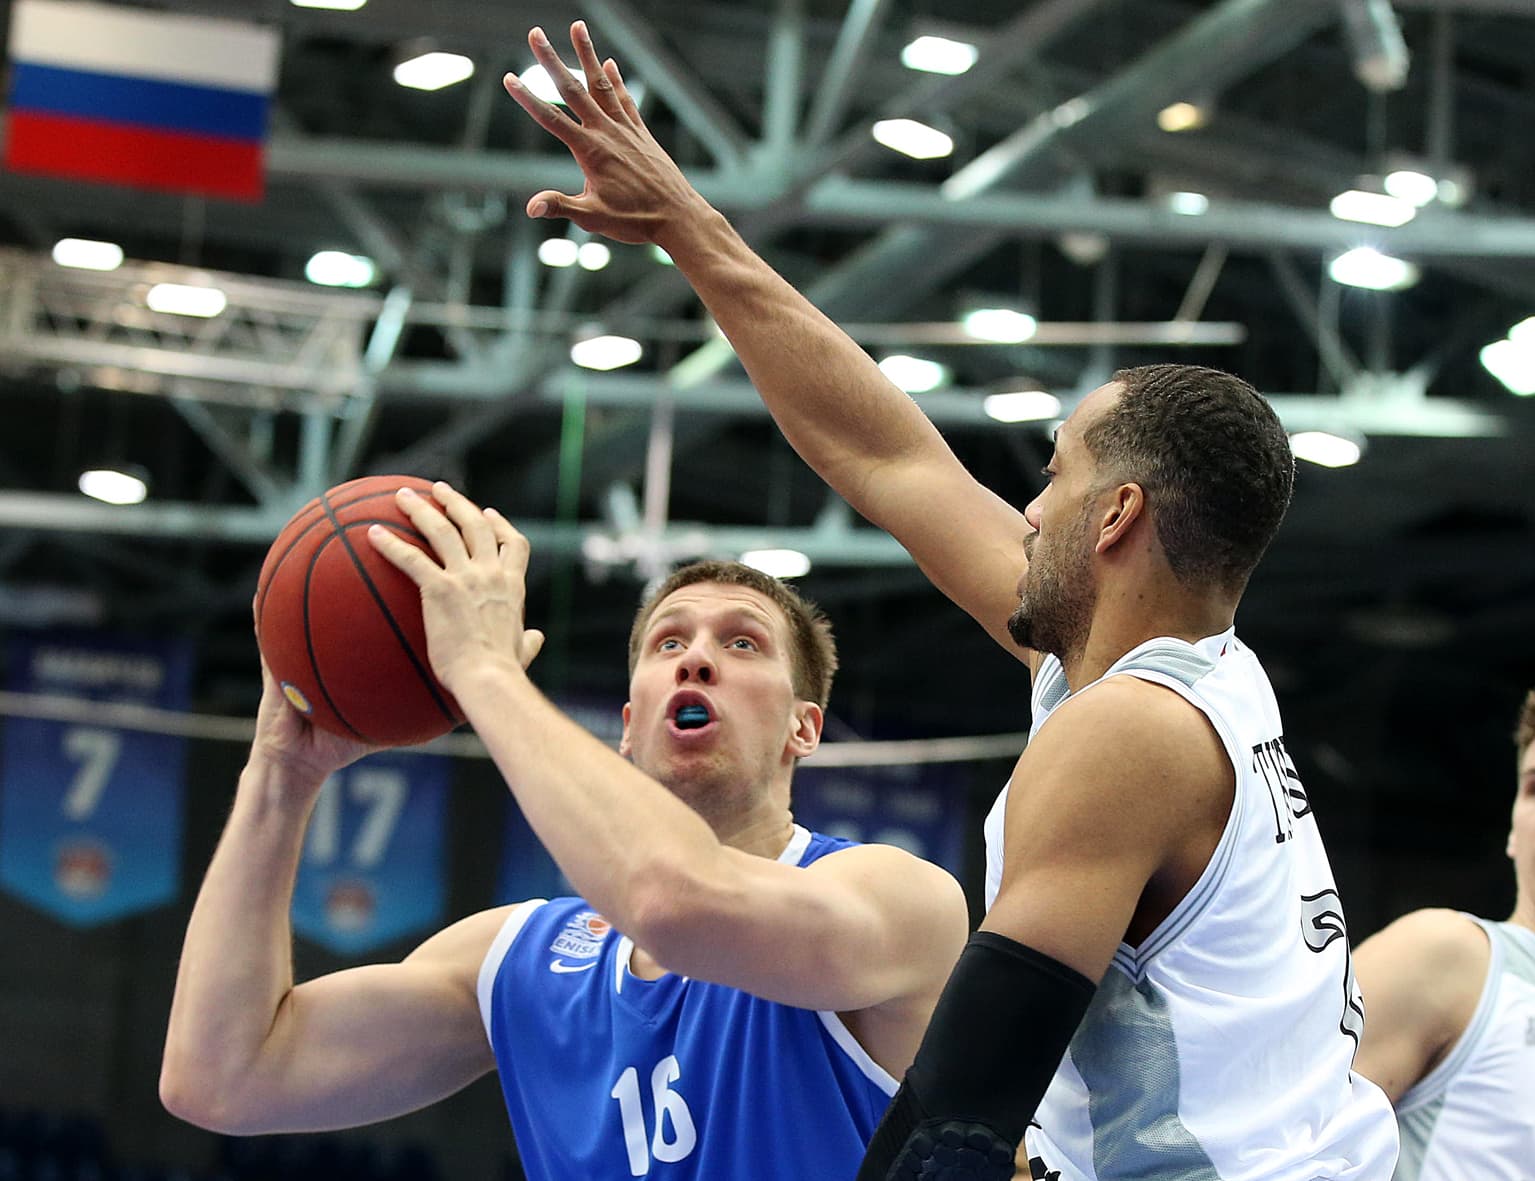 Nizhny’s Playoff Hopes Dimming After Loss To Enisey